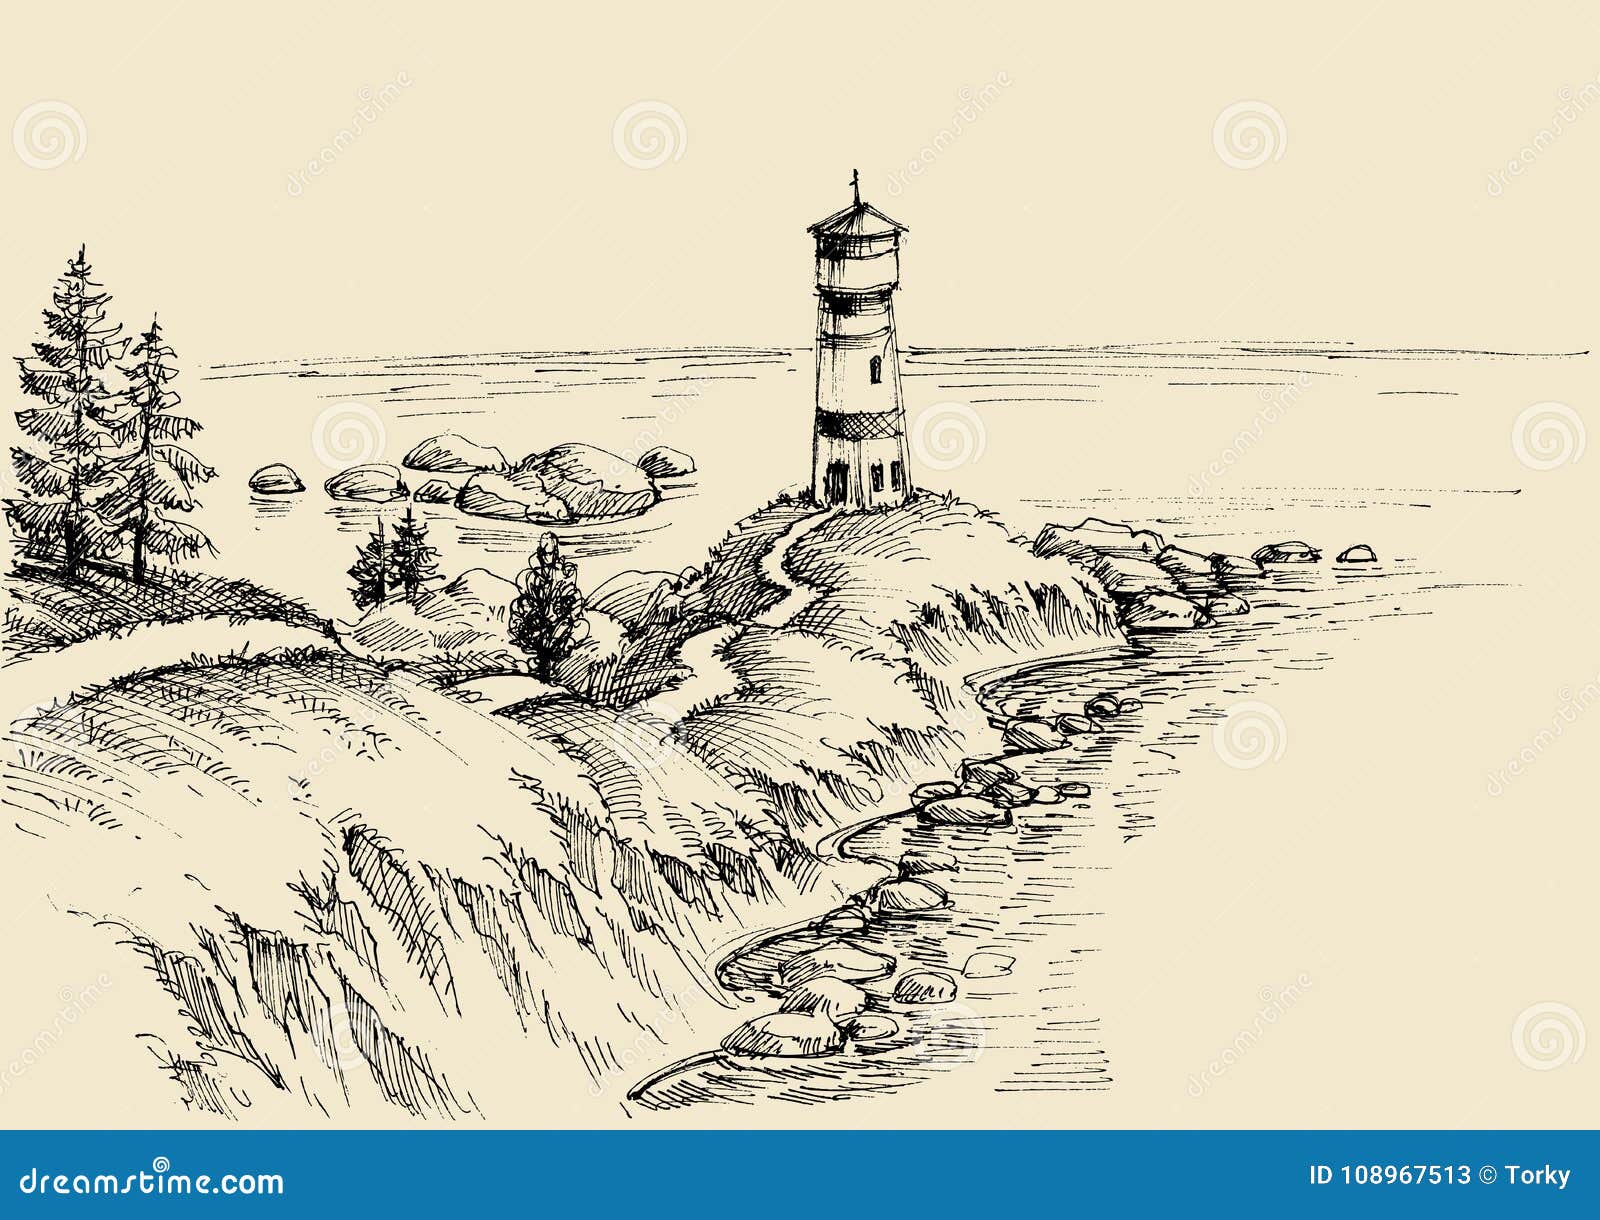 Sketch of island with lighthouse at ocean waters Vector Image